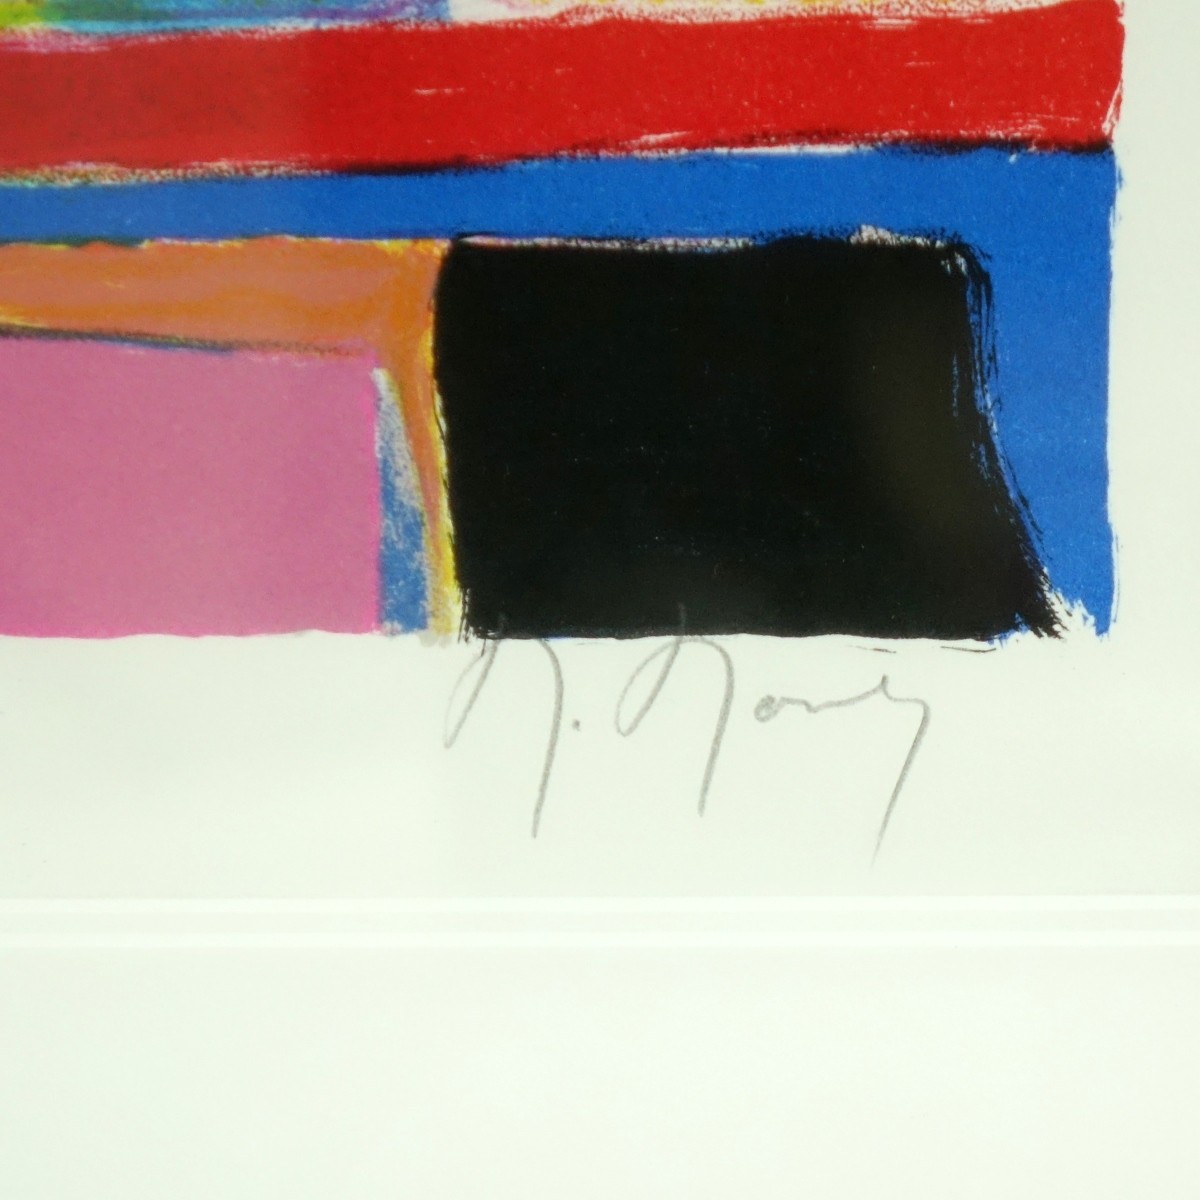 Marcel Mouly, French (1918 - 2008) Lithograph